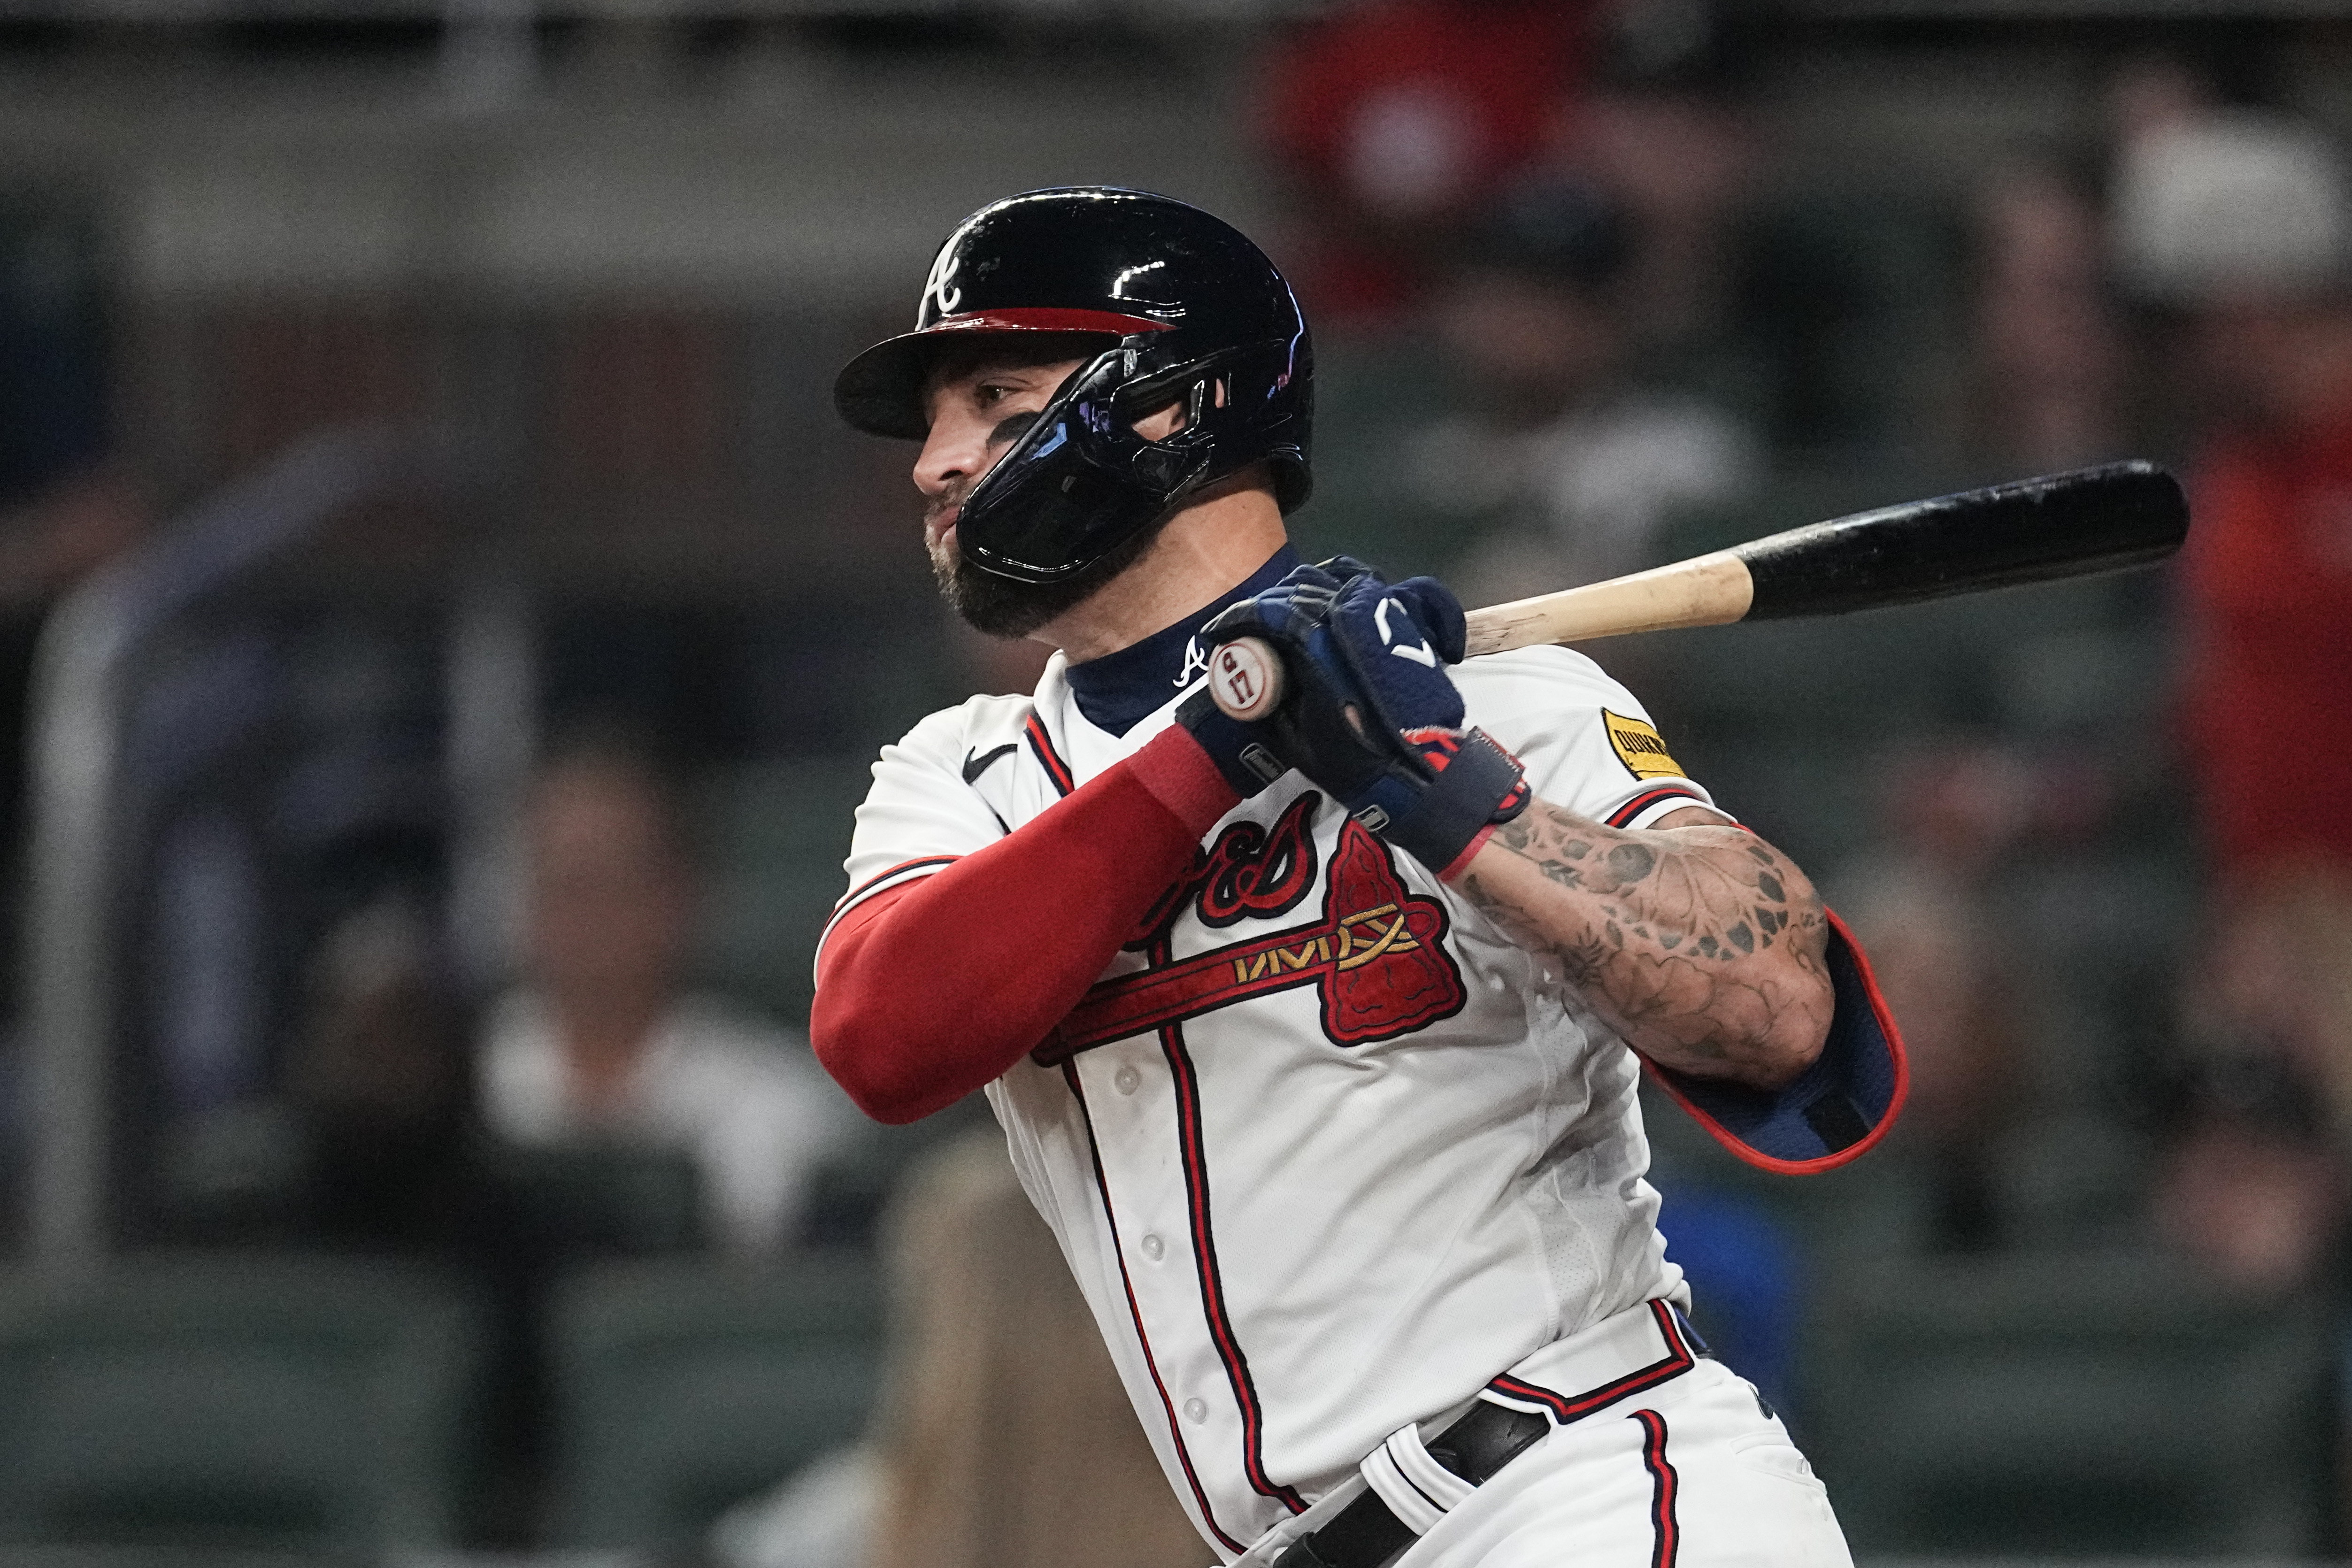 Braves' Acuna Jr. nears becoming first 40-60 man, homers twice in win